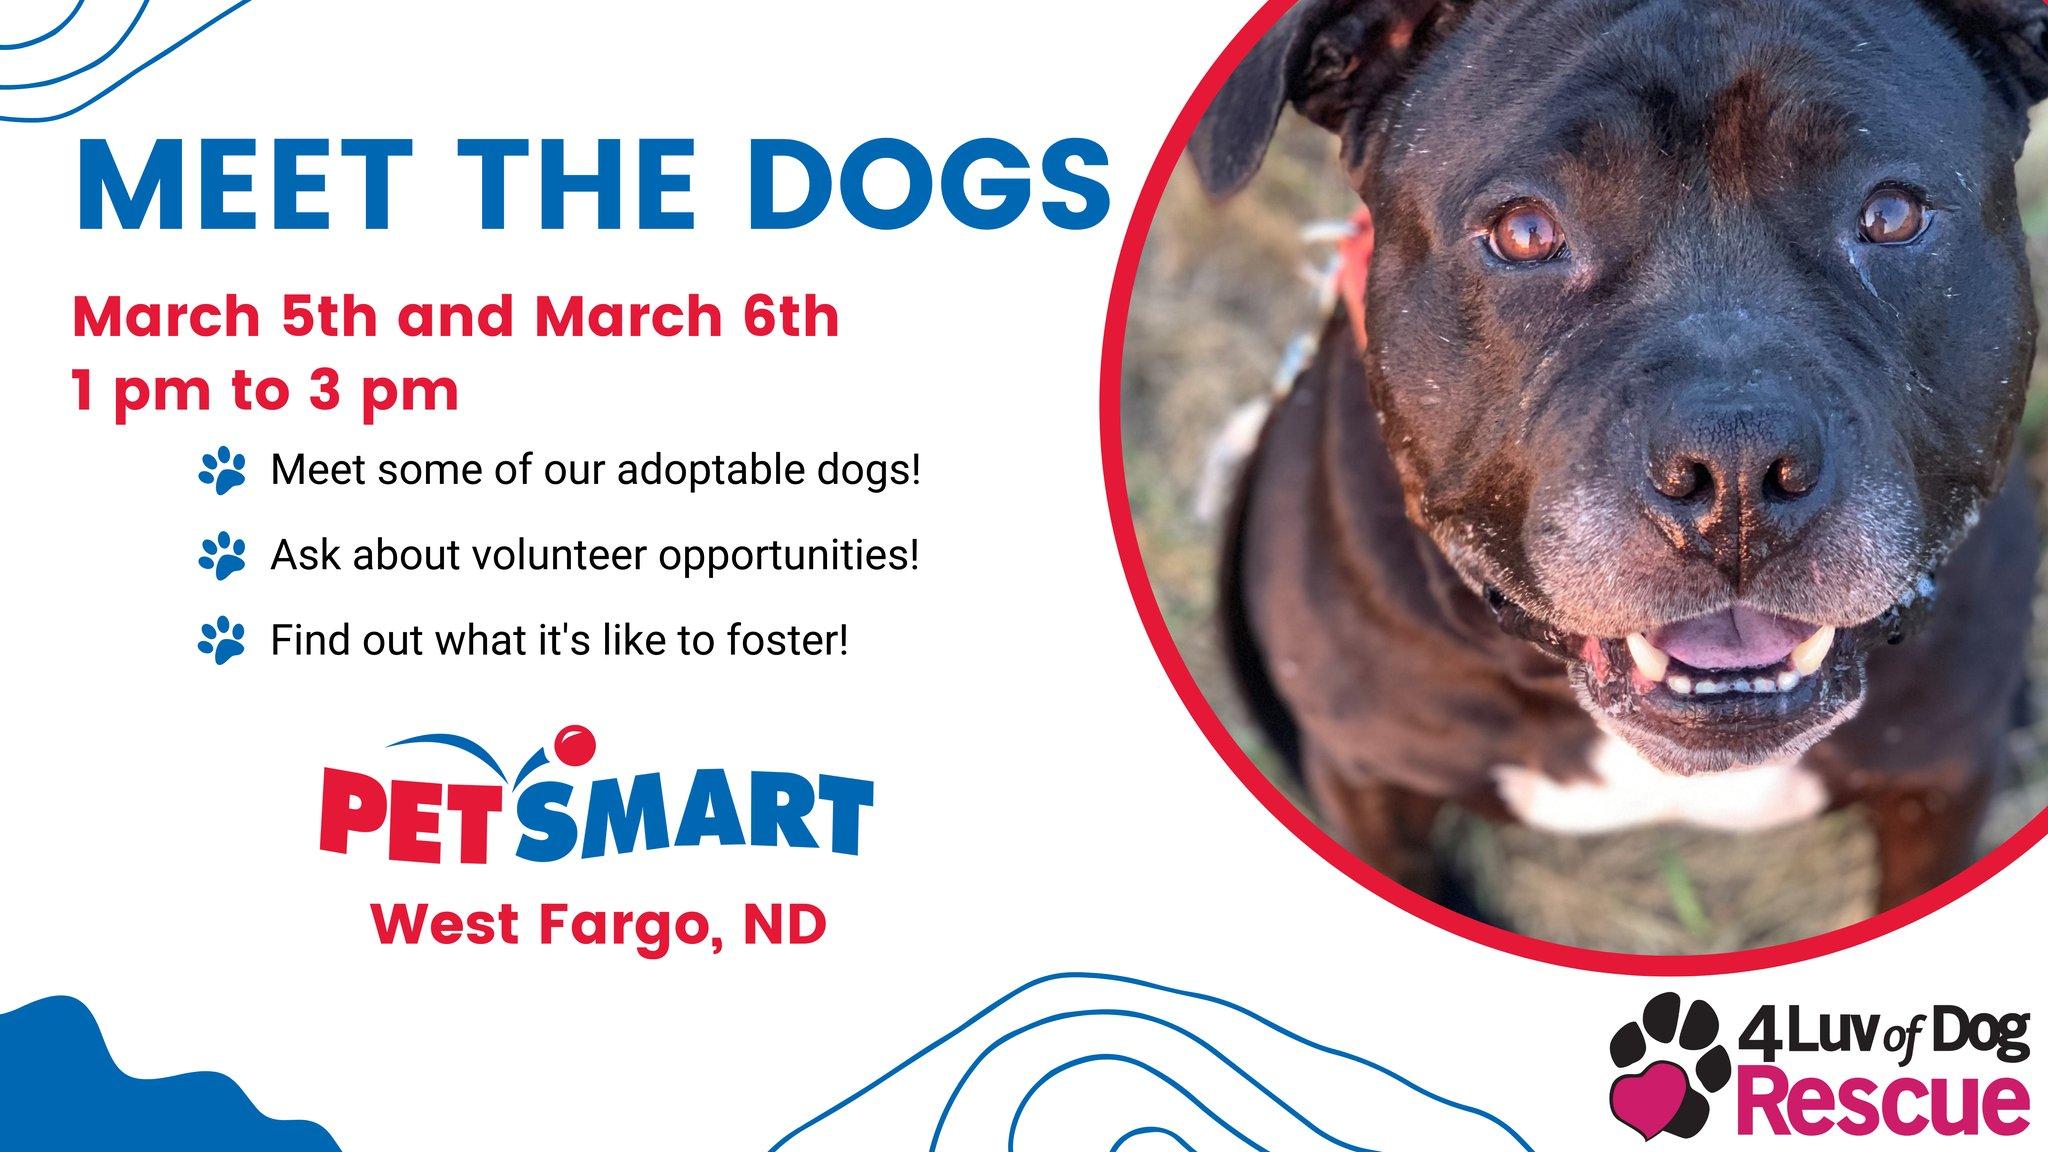 4 Luv of Dog Rescue Meet the Dogs Event - March 5-6, 2022